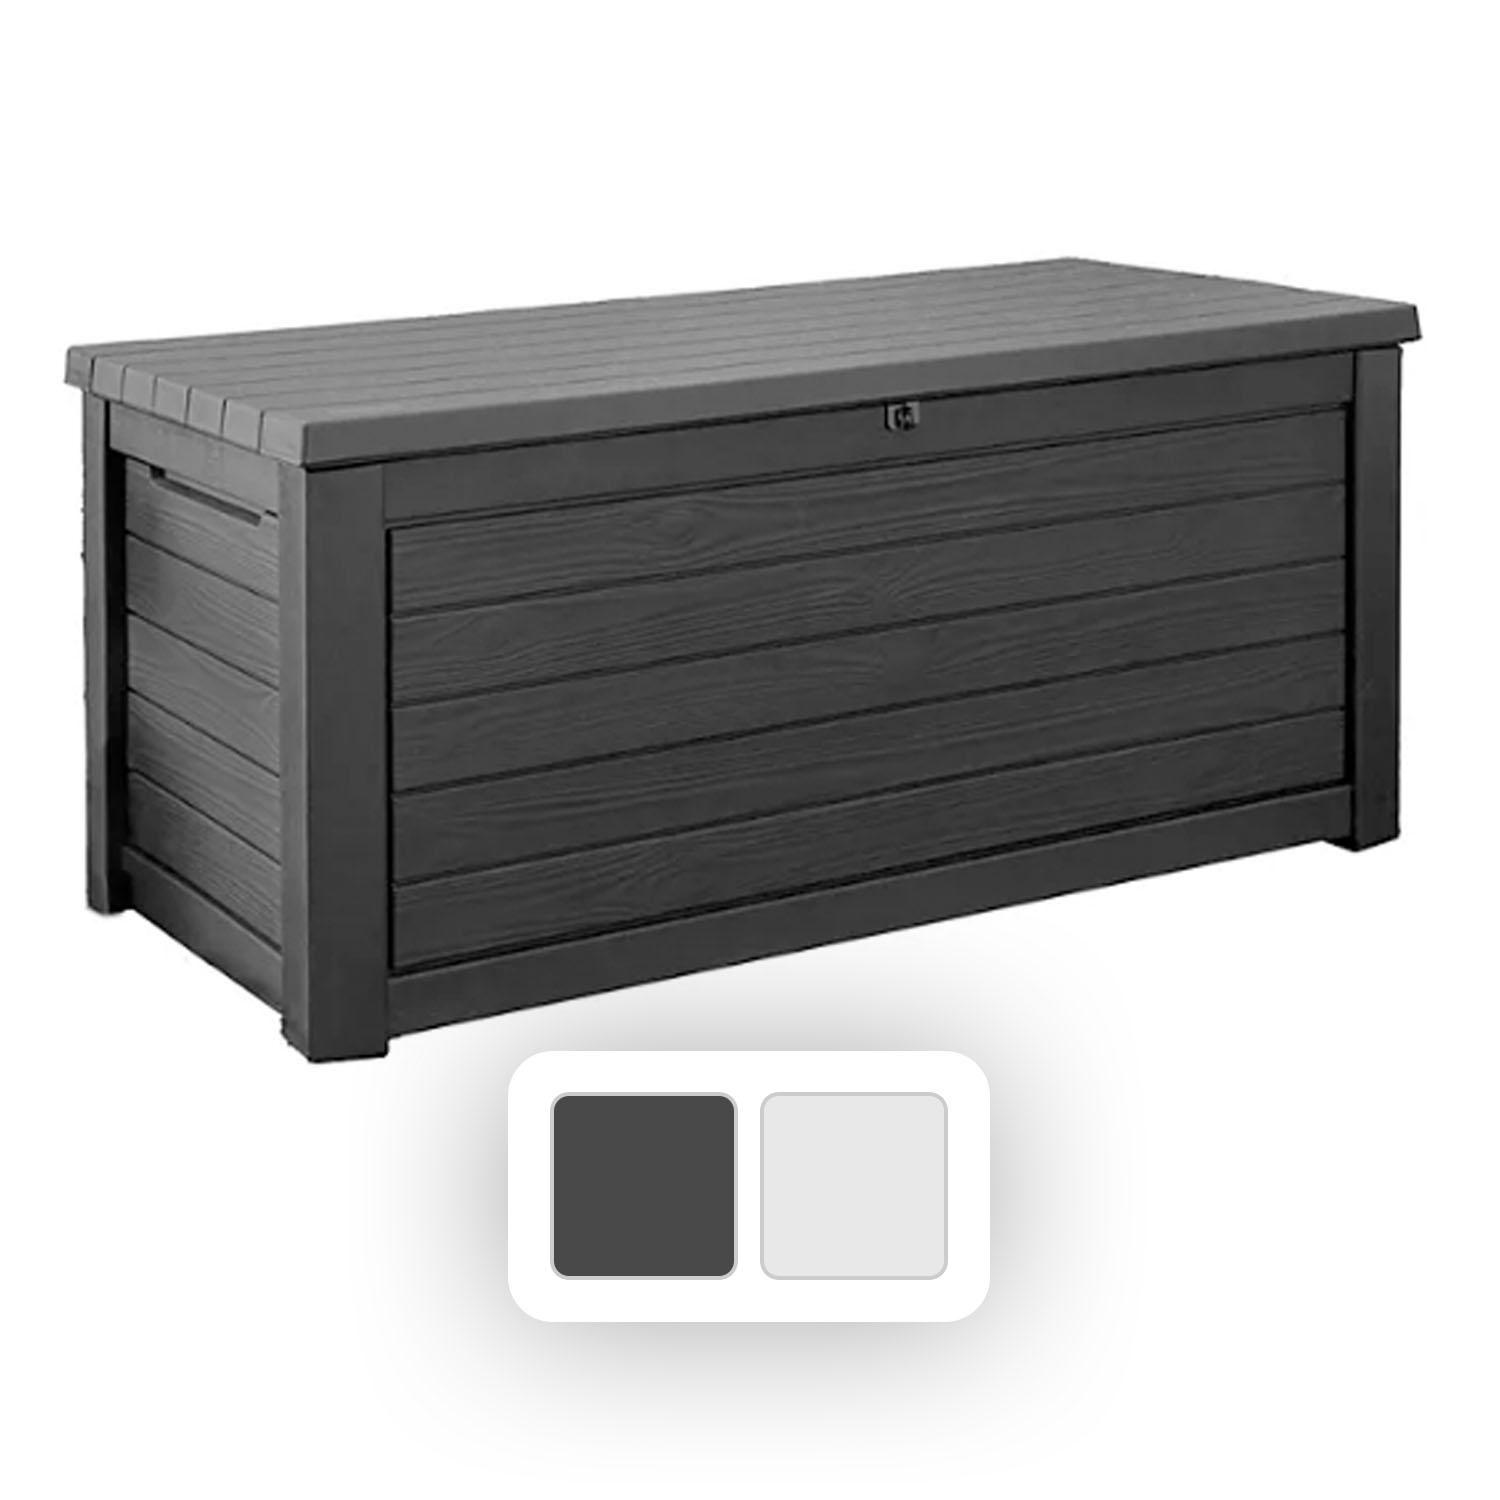 Keter 165-Gallon Resin Outdoor Deck Box, Brown Non-Brushed